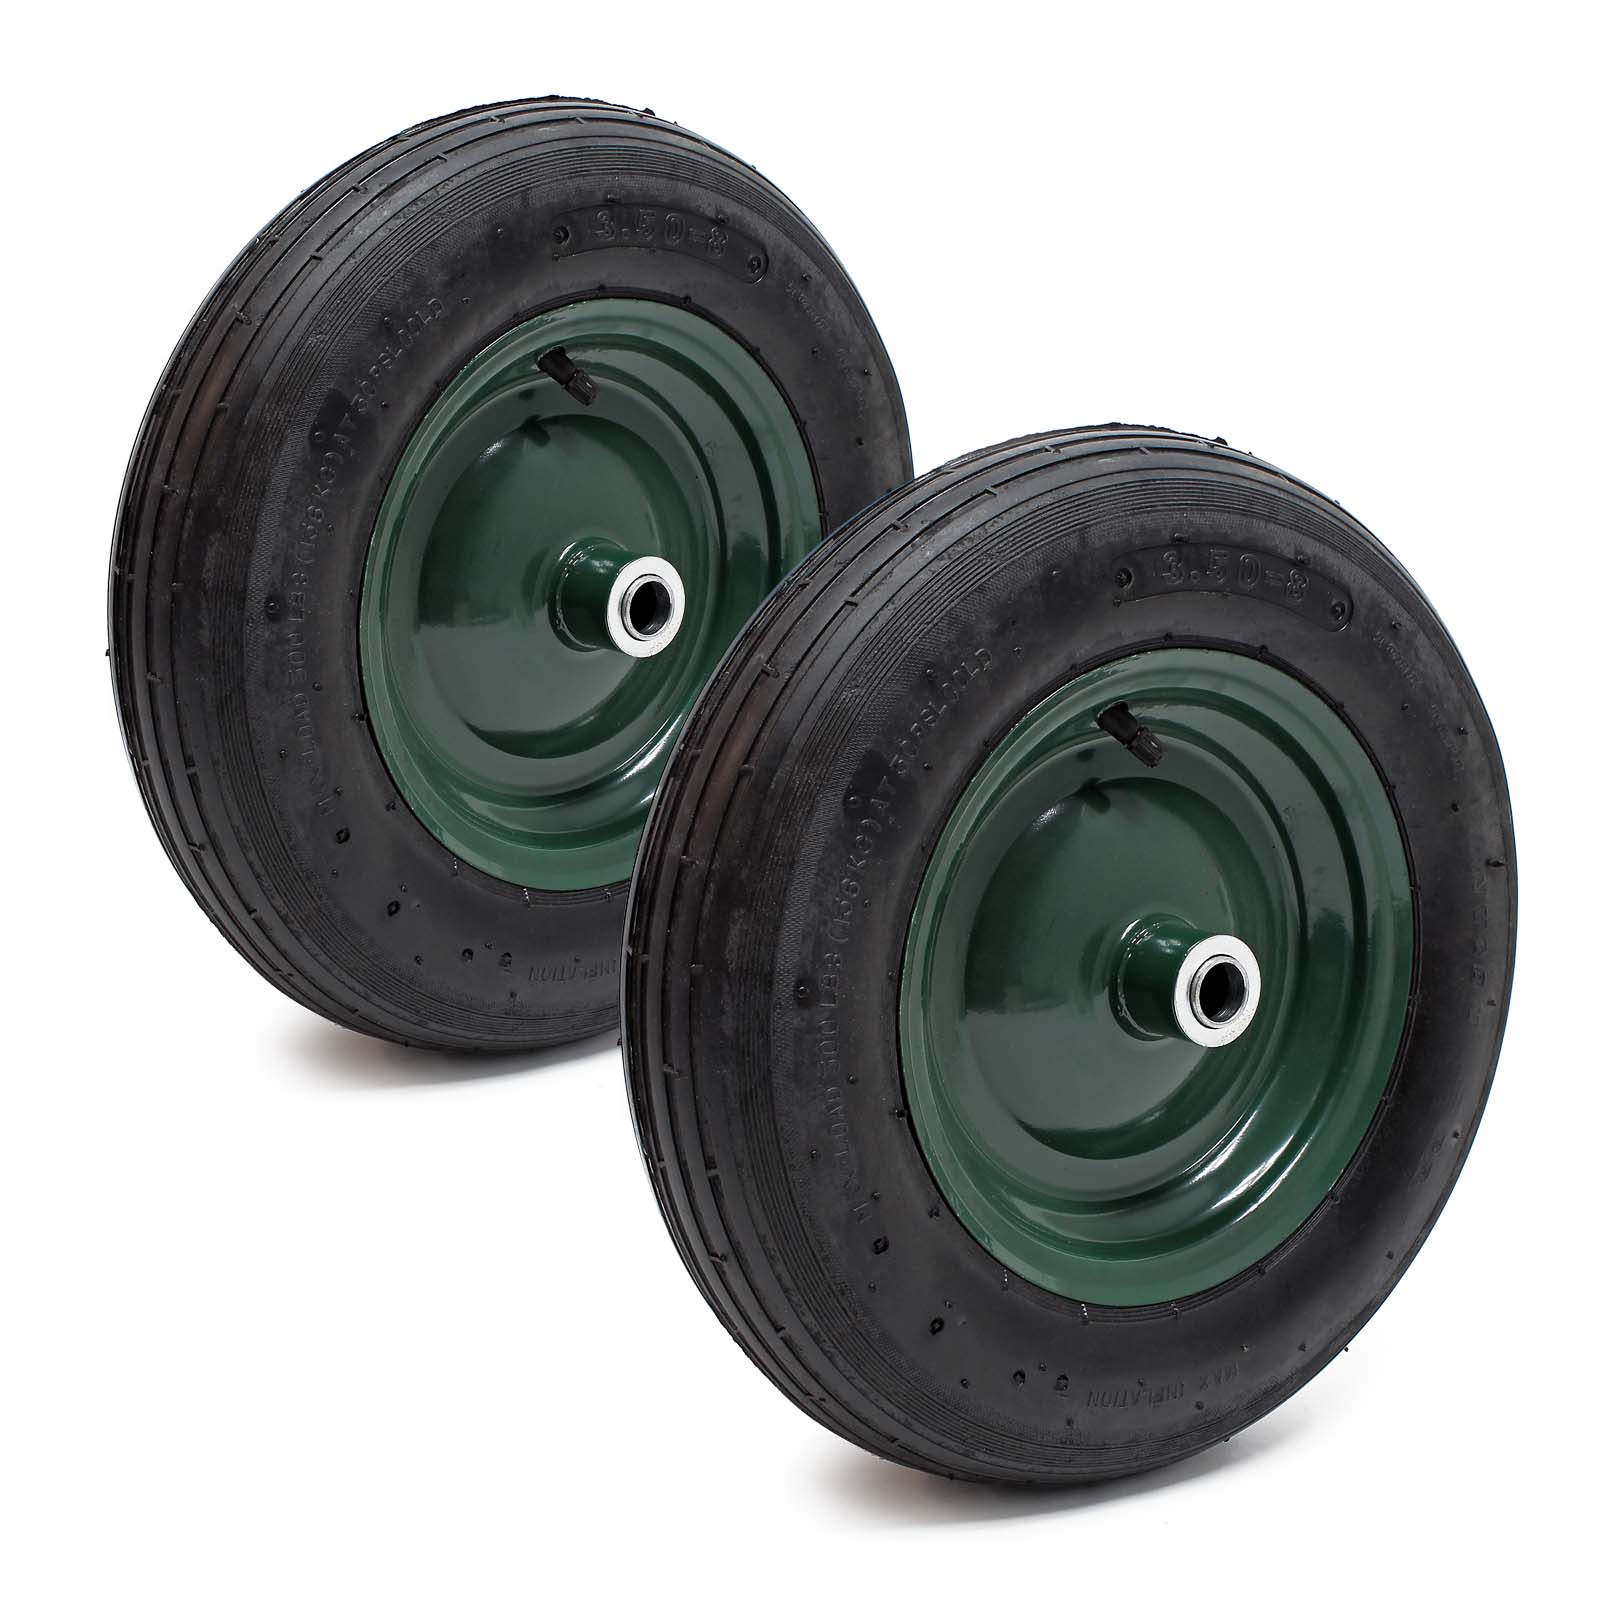 2x Wheelbarrow Wheel 3.50-8 Tyre up to 120 kg with Rim and Tube